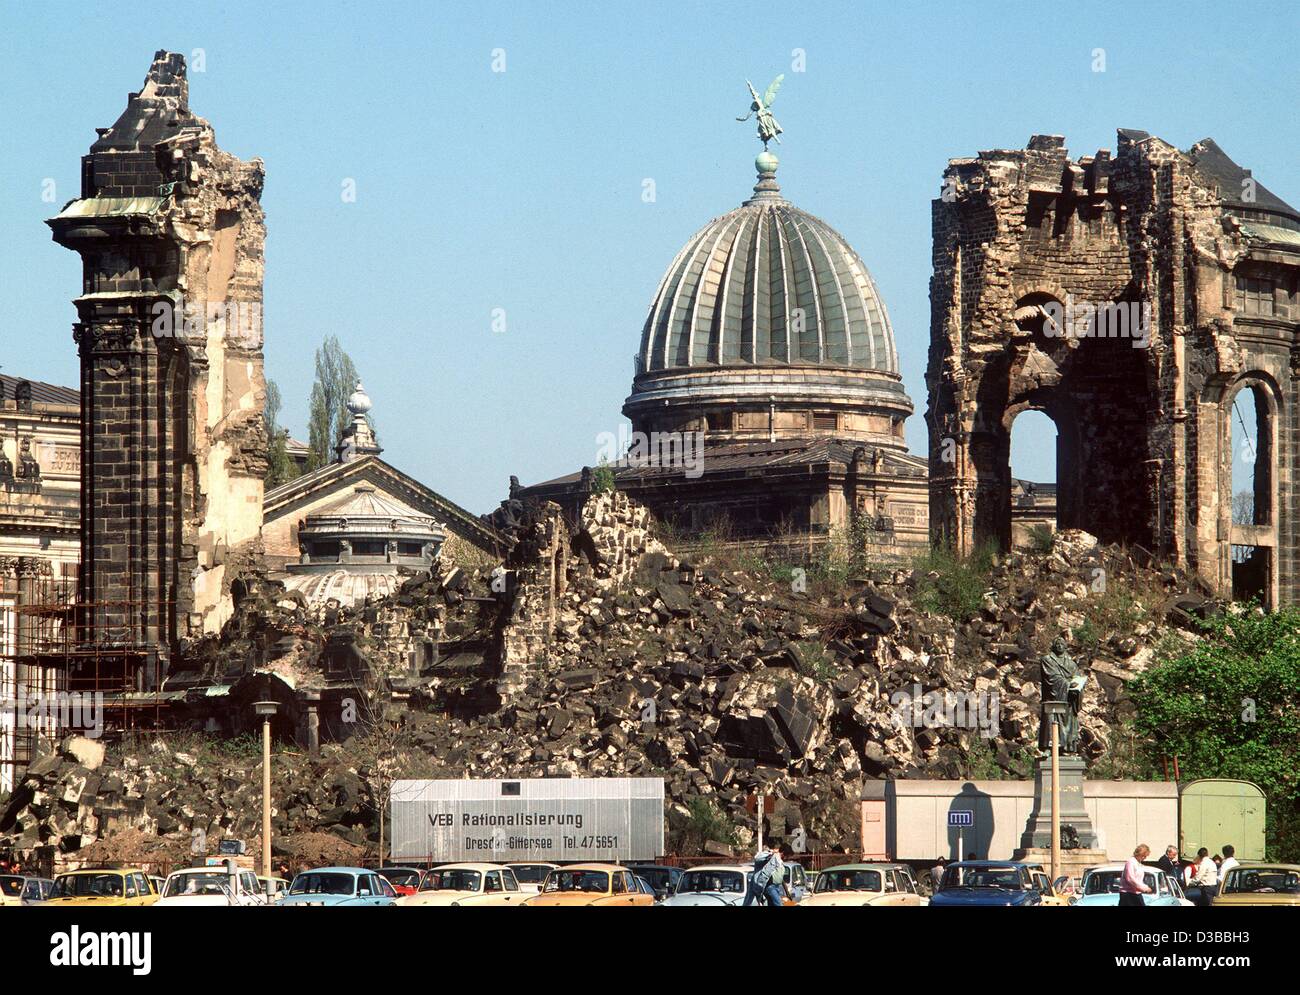 dpa-files-a-view-of-the-ruins-of-the-destroyed-frauenkirche-church-D3BBH3.jpg